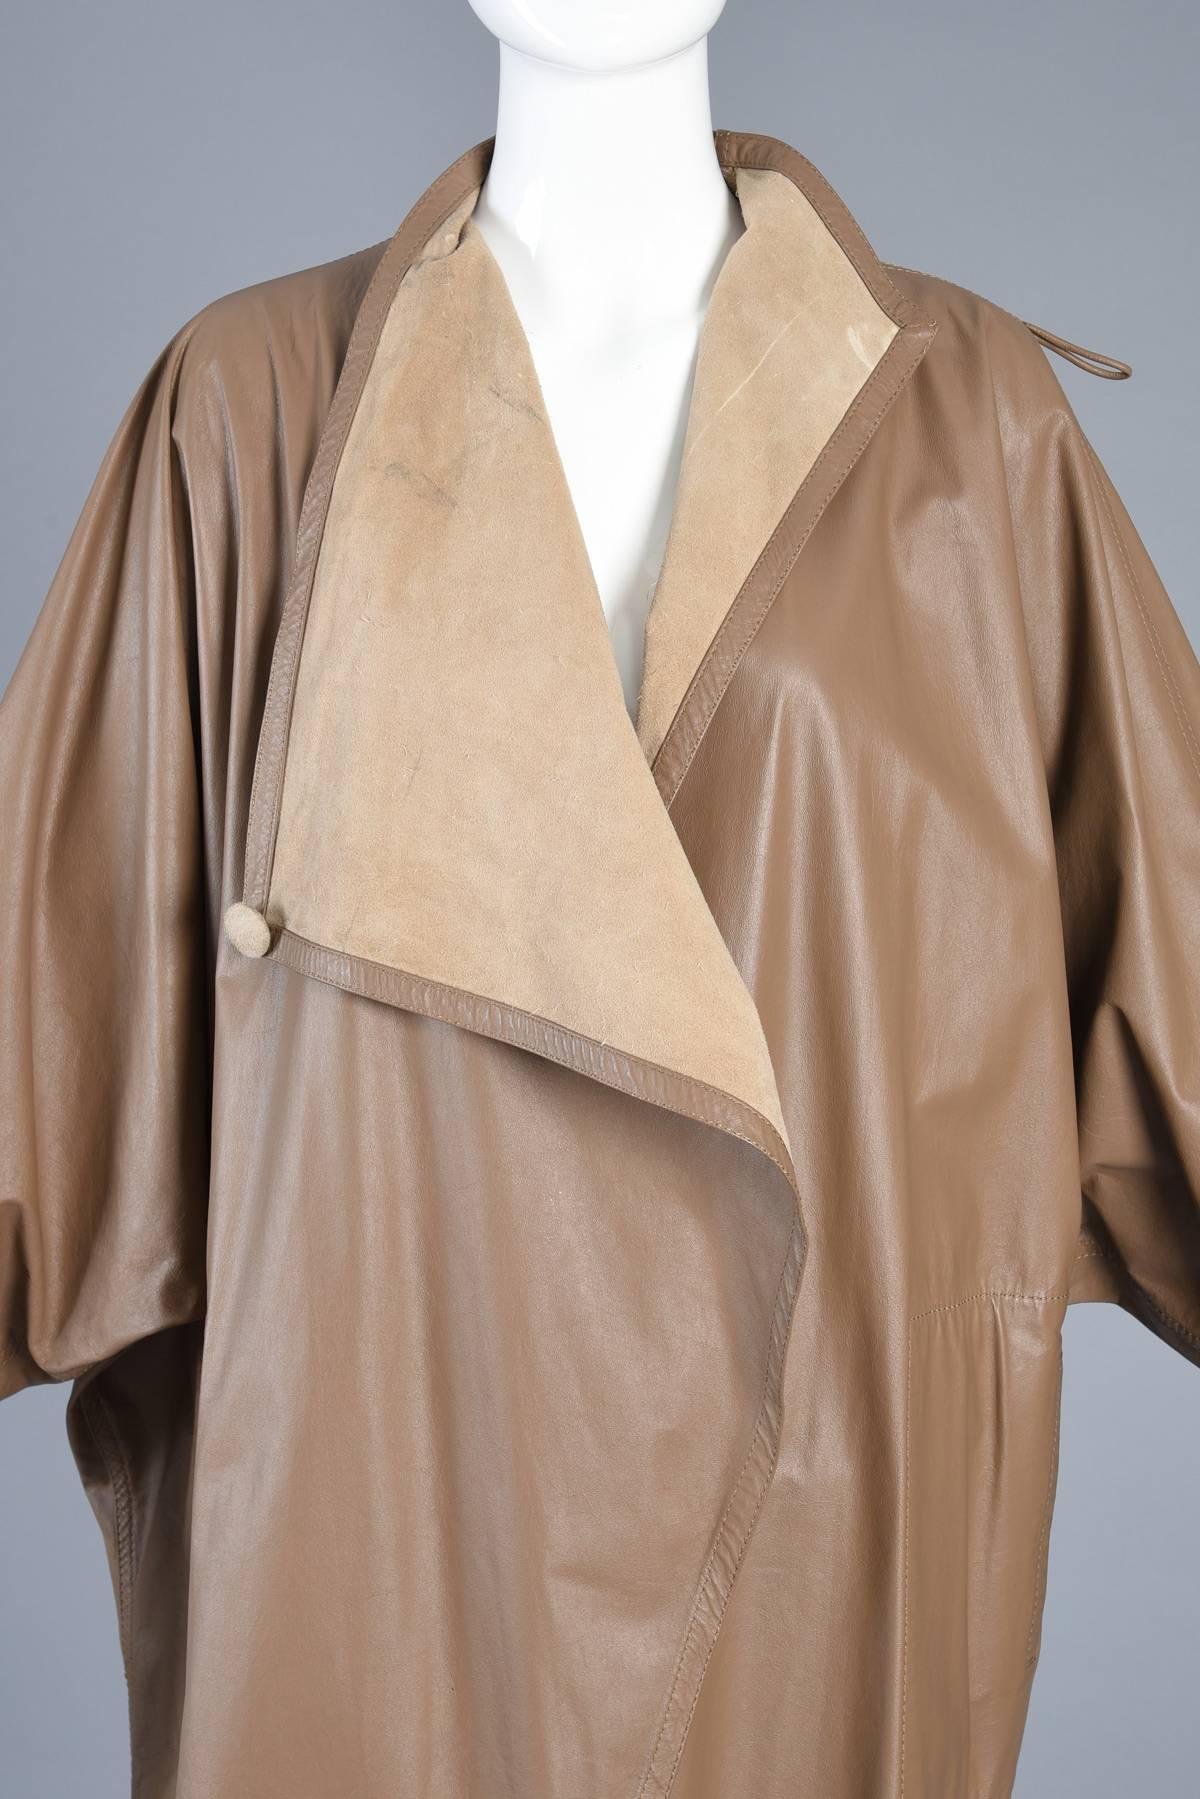 Incredible 1980s Reversible Suede Leather Avant Garde Draped Cape For Sale 3